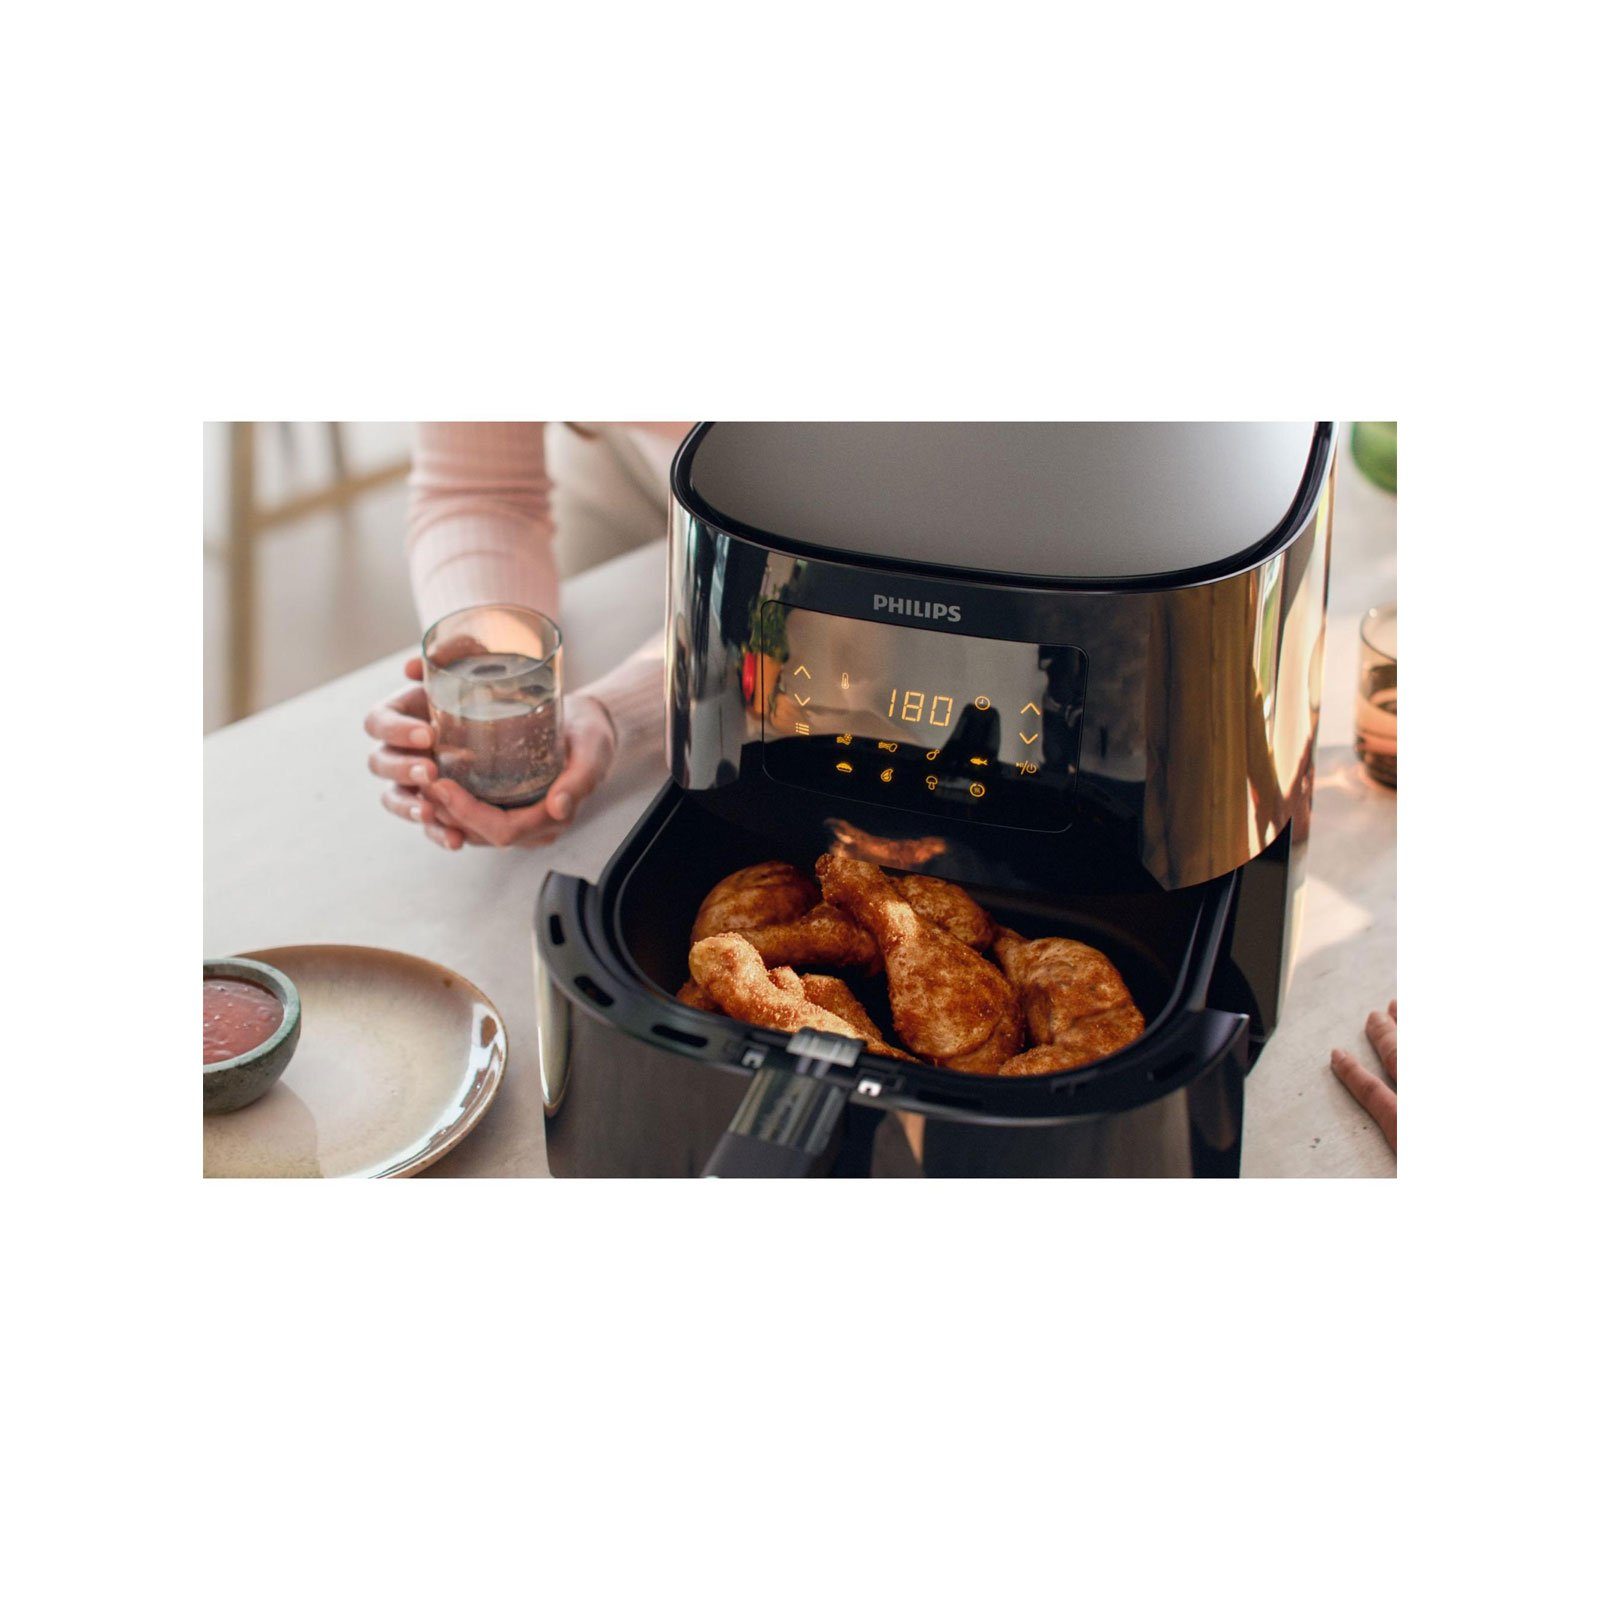 XL, 2000 Philips Airfryer HD9270/70 W Essential Fritteuse